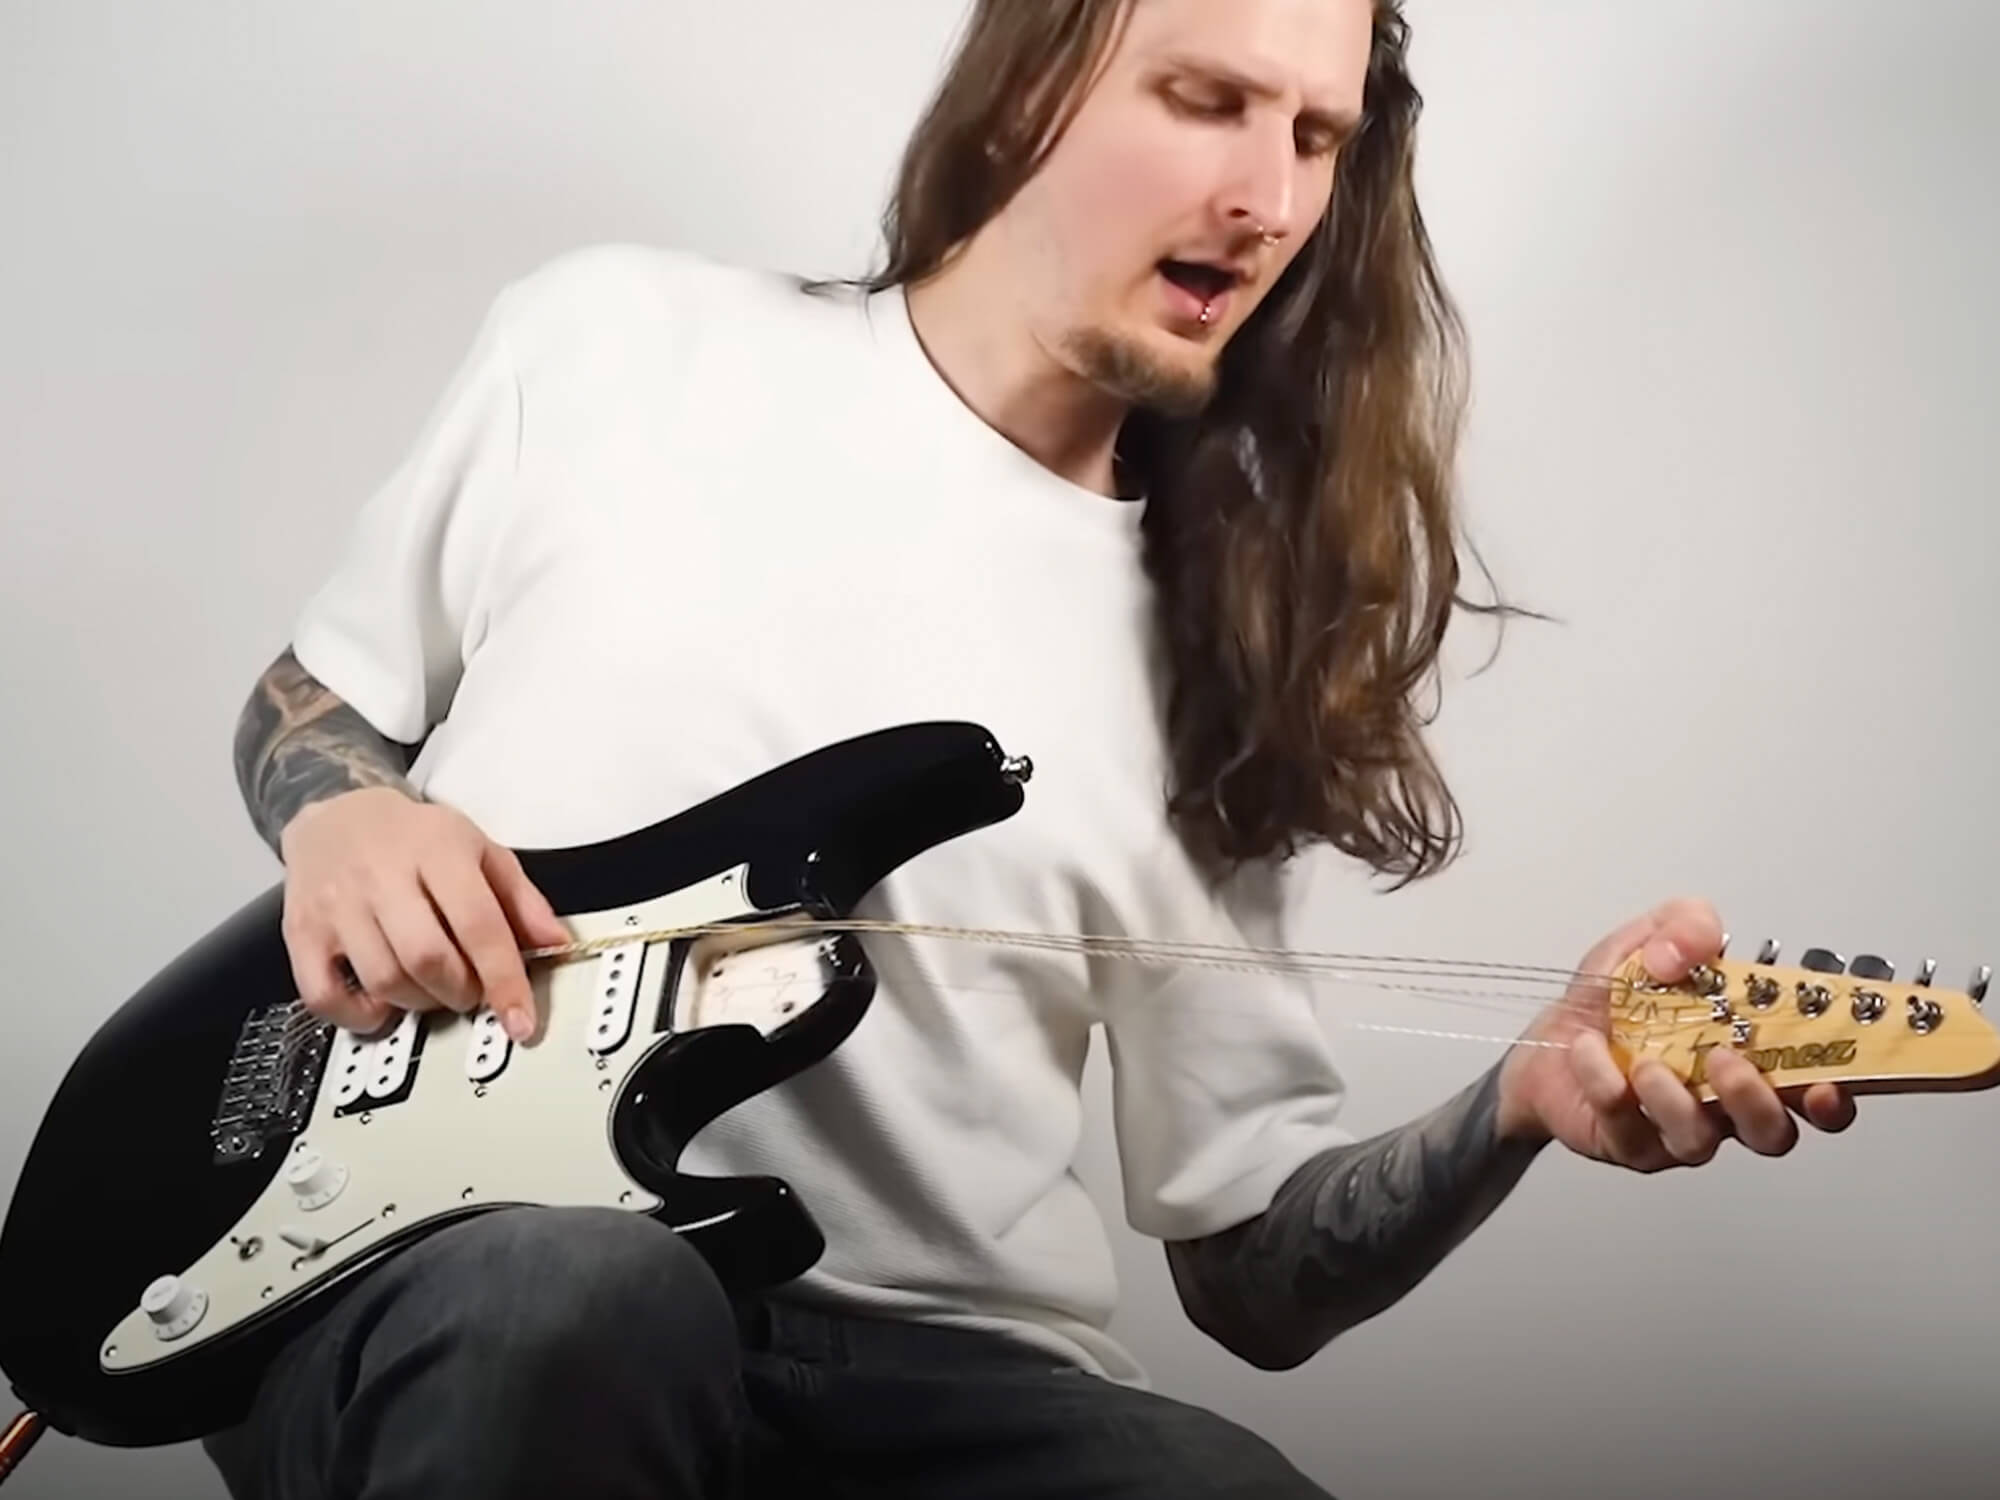 Screencap from Bernth's video showing him playing the black Strat model. He's holding the headstock to pull the strings.